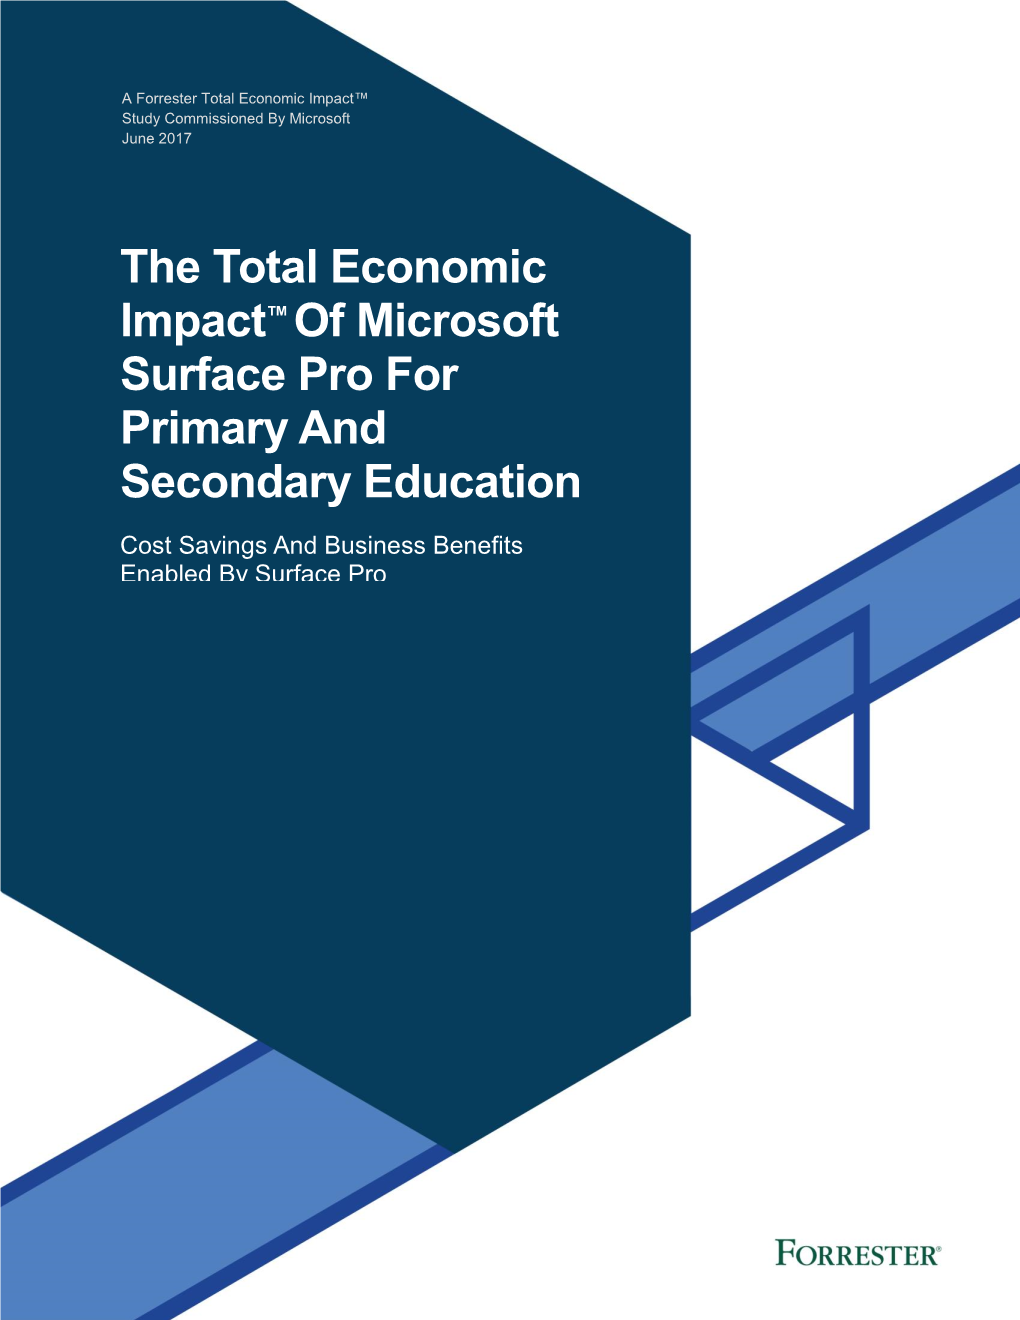 The Total Economic Impact™ of Microsoft Surface Pro for Primary and Secondary Education